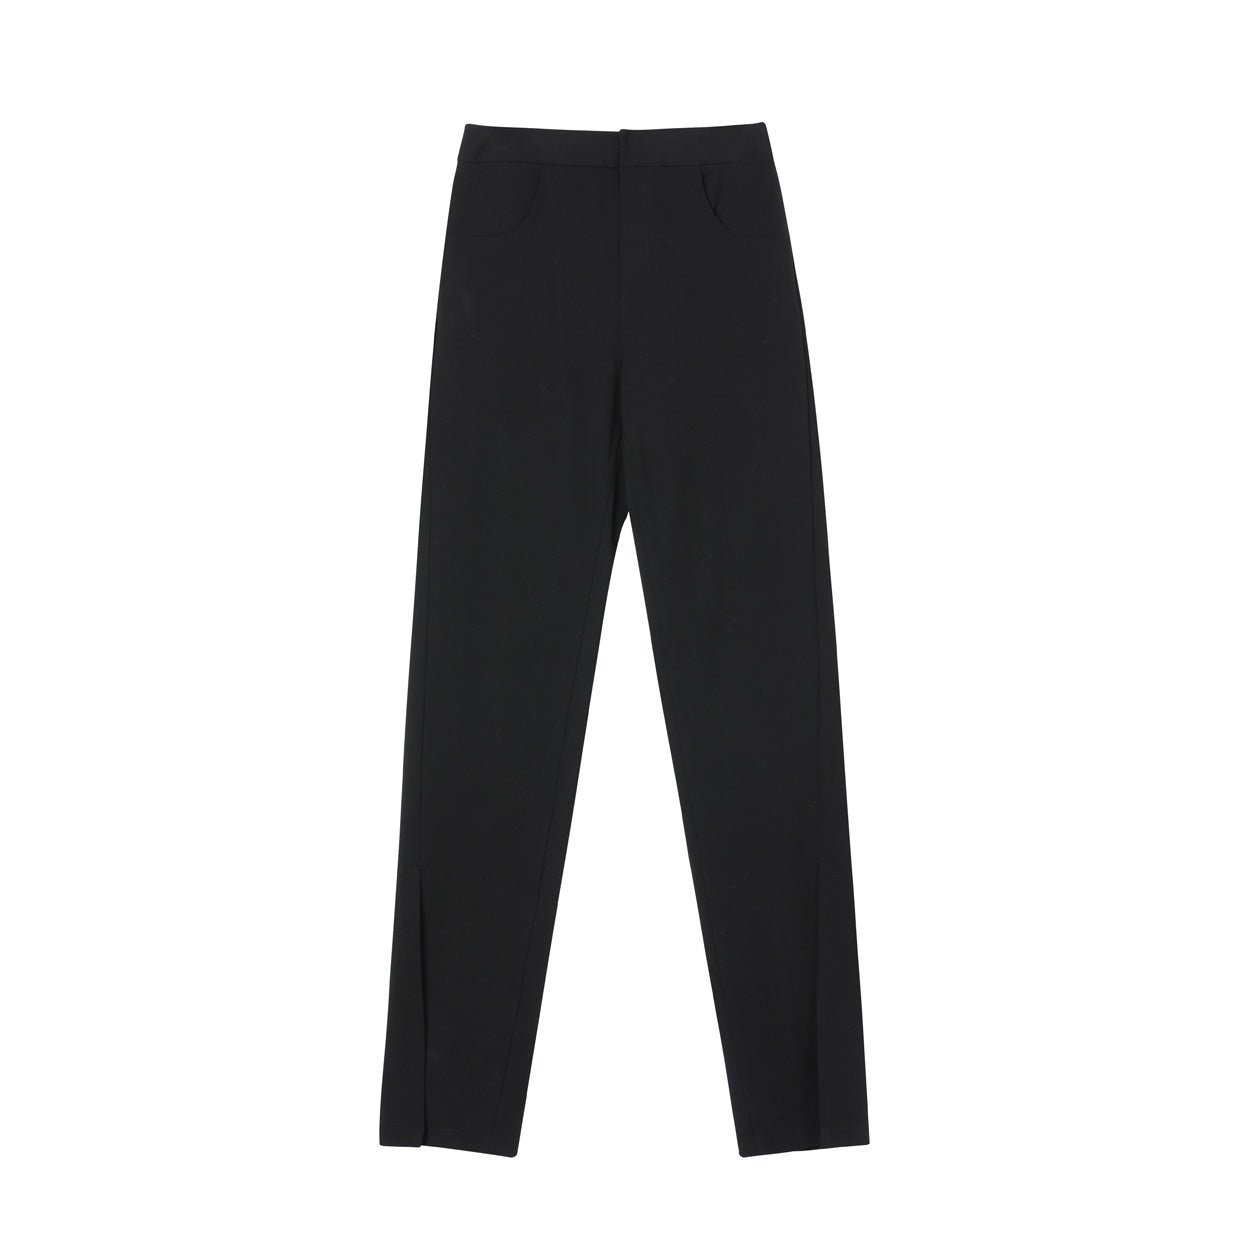 MEDIUM WELL Black Side Slit Casual Pants | MADA IN CHINA